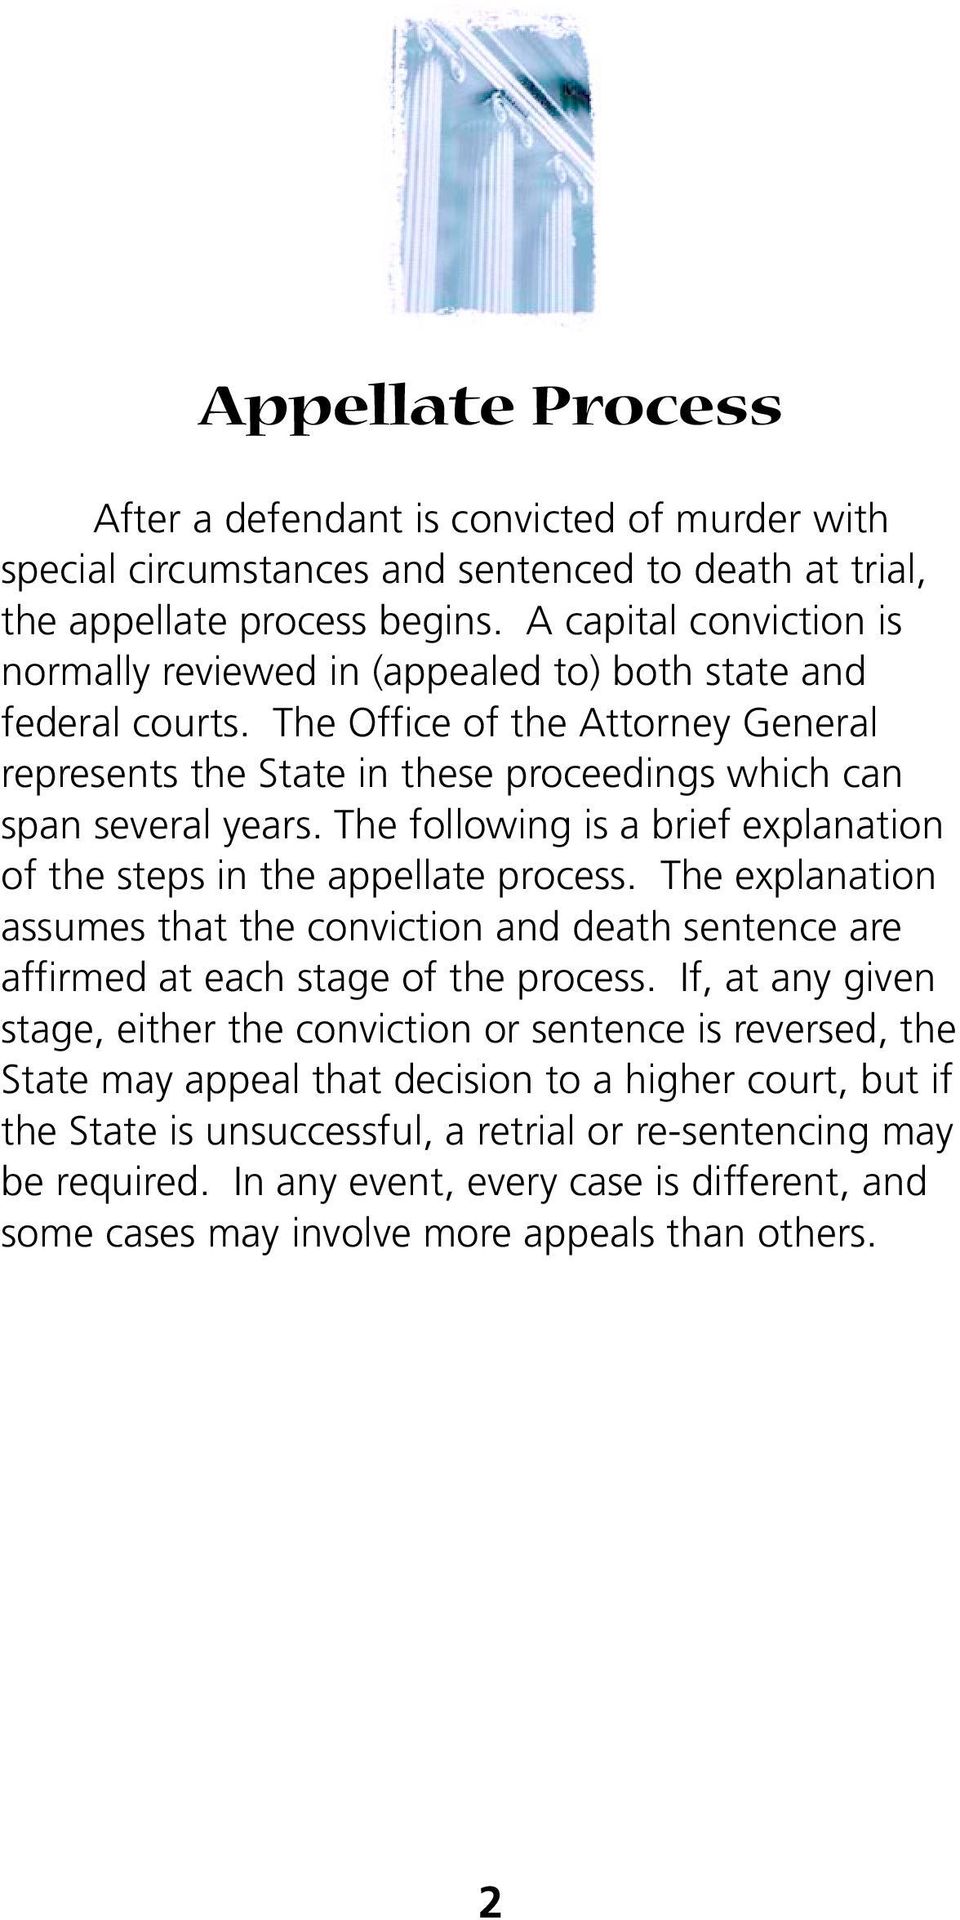 The following is a brief explanation of the steps in the appellate process. The explanation assumes that the conviction and death sentence are affirmed at each stage of the process.